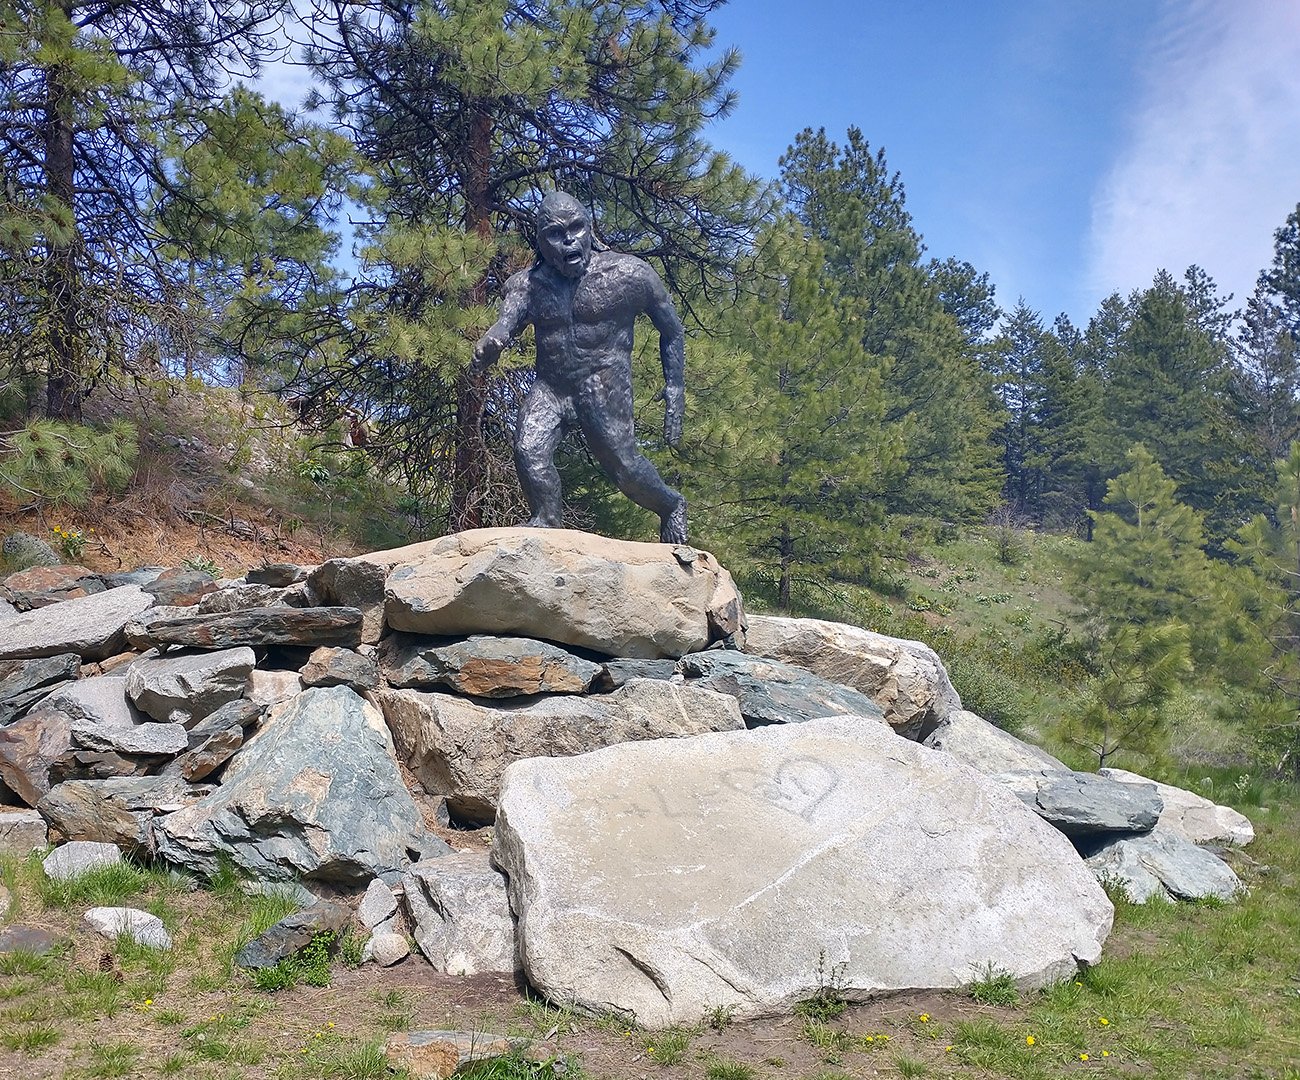 The top of the climb is officially marked by this anatomically correct Sasquatch statue.